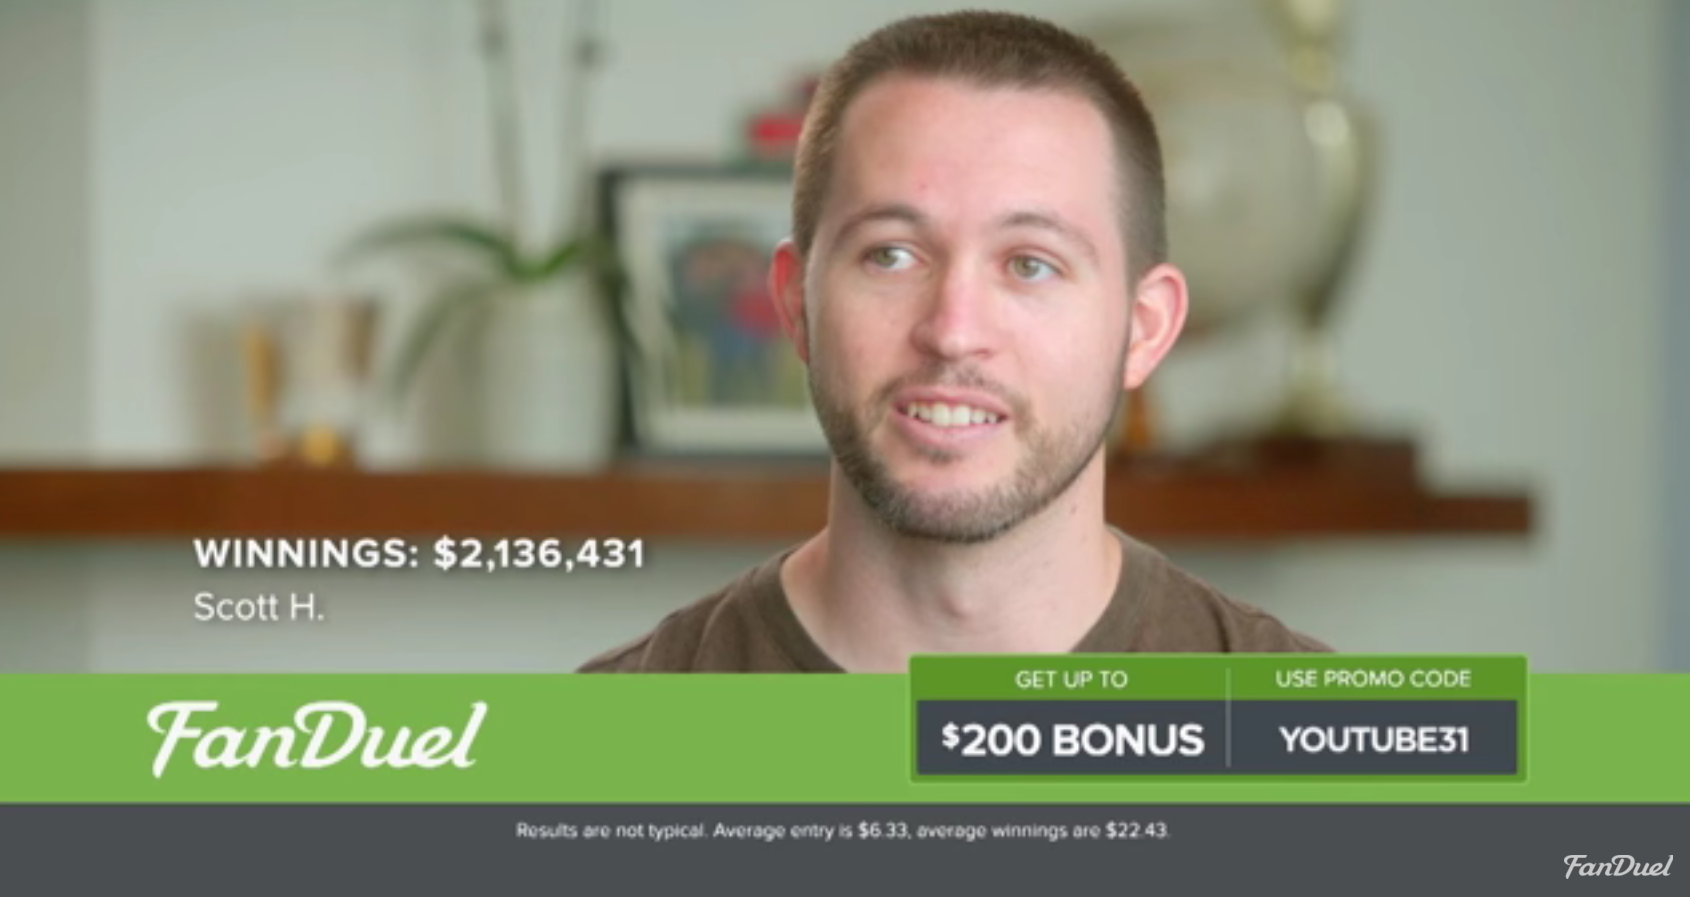 FanDuel CEO Admits: Maybe They Might Have Overdone It A Bit With The TV Ads